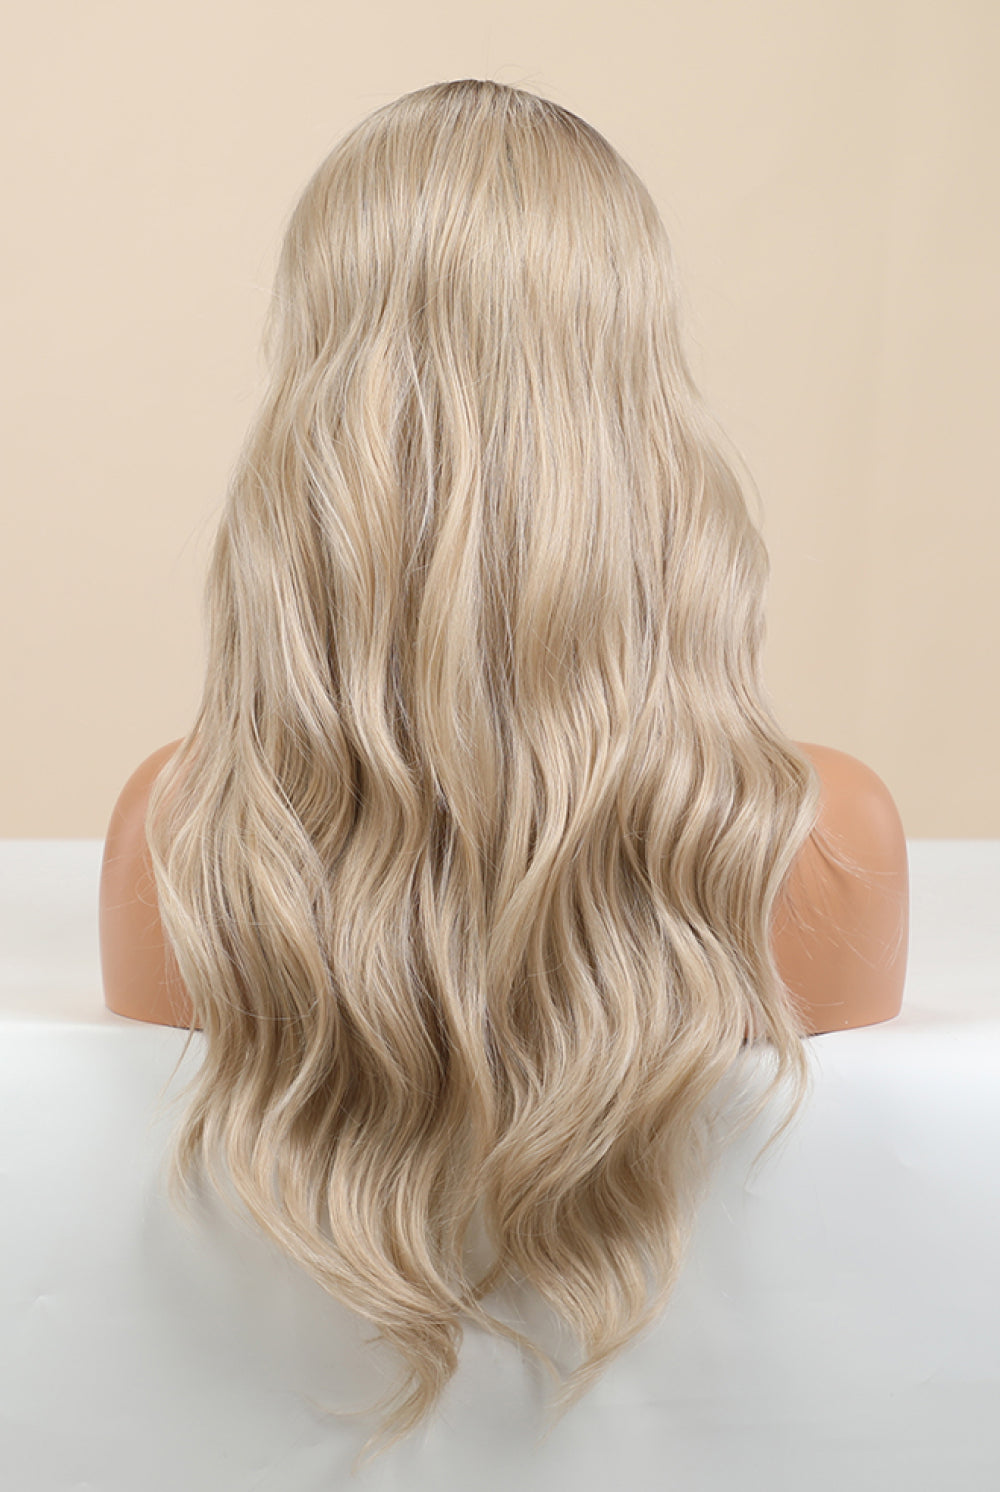 Gray Late Night 13*2" Wave Lace Front Synthetic Wigs in Gold 26" Long 150% Density- Blonde Wigs